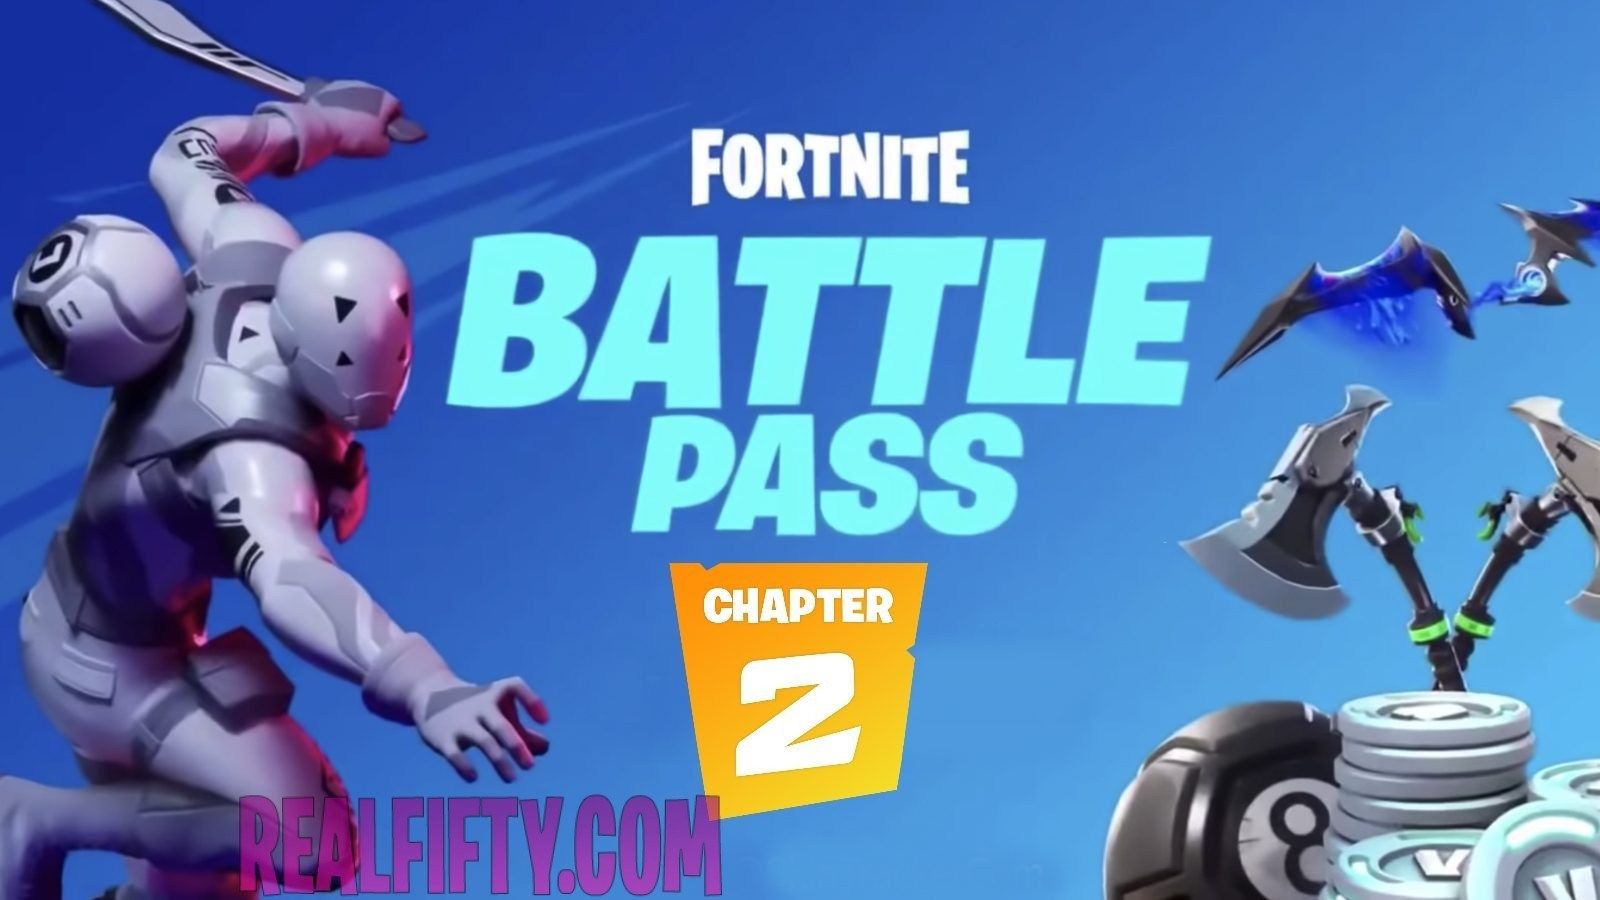 What's in the Fortnite Chapter 2 Battle Pass? All tiers and rewards